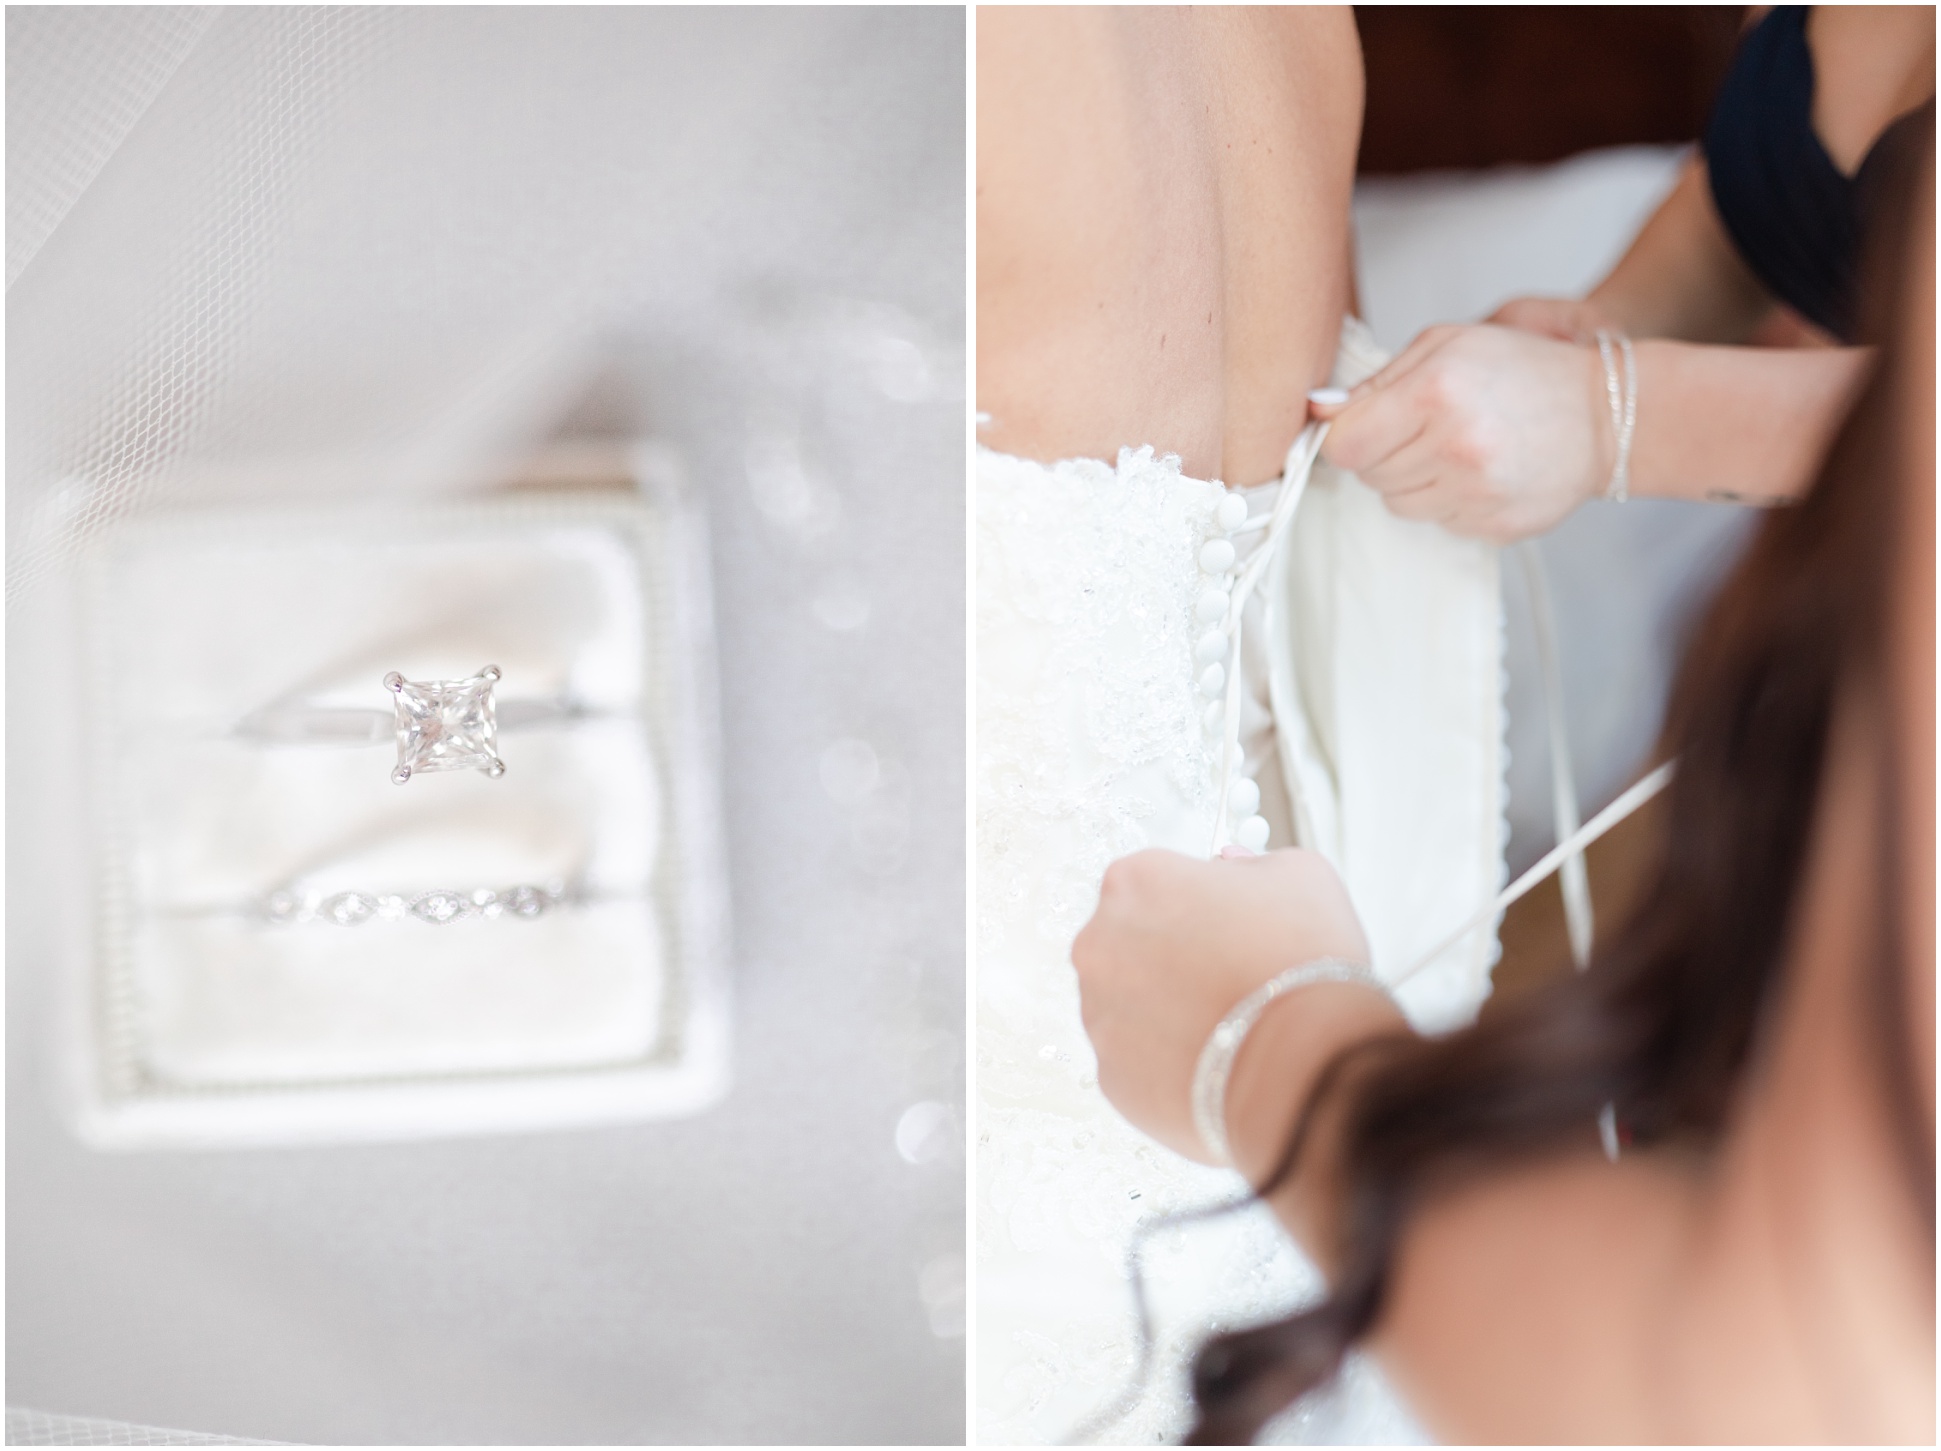 Left: Square diamond ring with wedding band in the Mrs. Box, Right: Bridesmaids tying the bride's dress